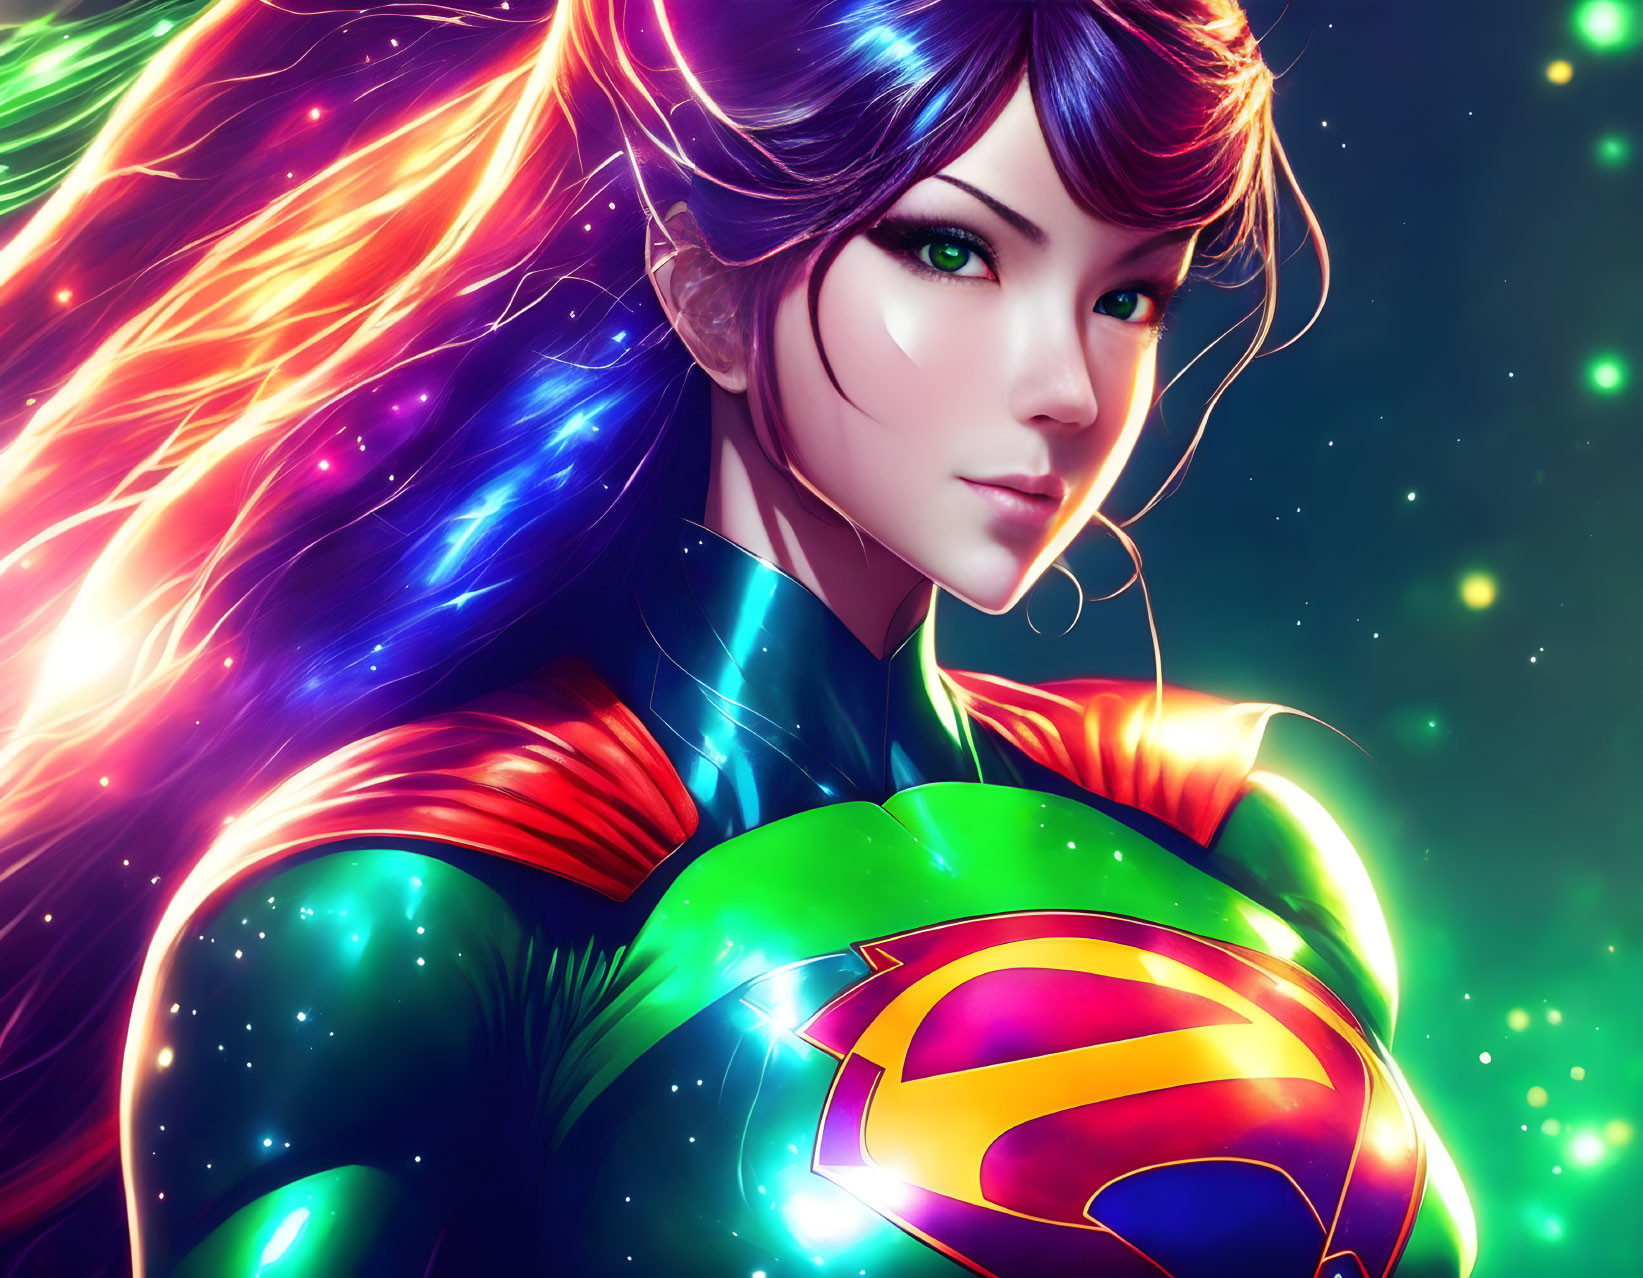 A Famous Anime Supergirl is the Green Lantern Woma